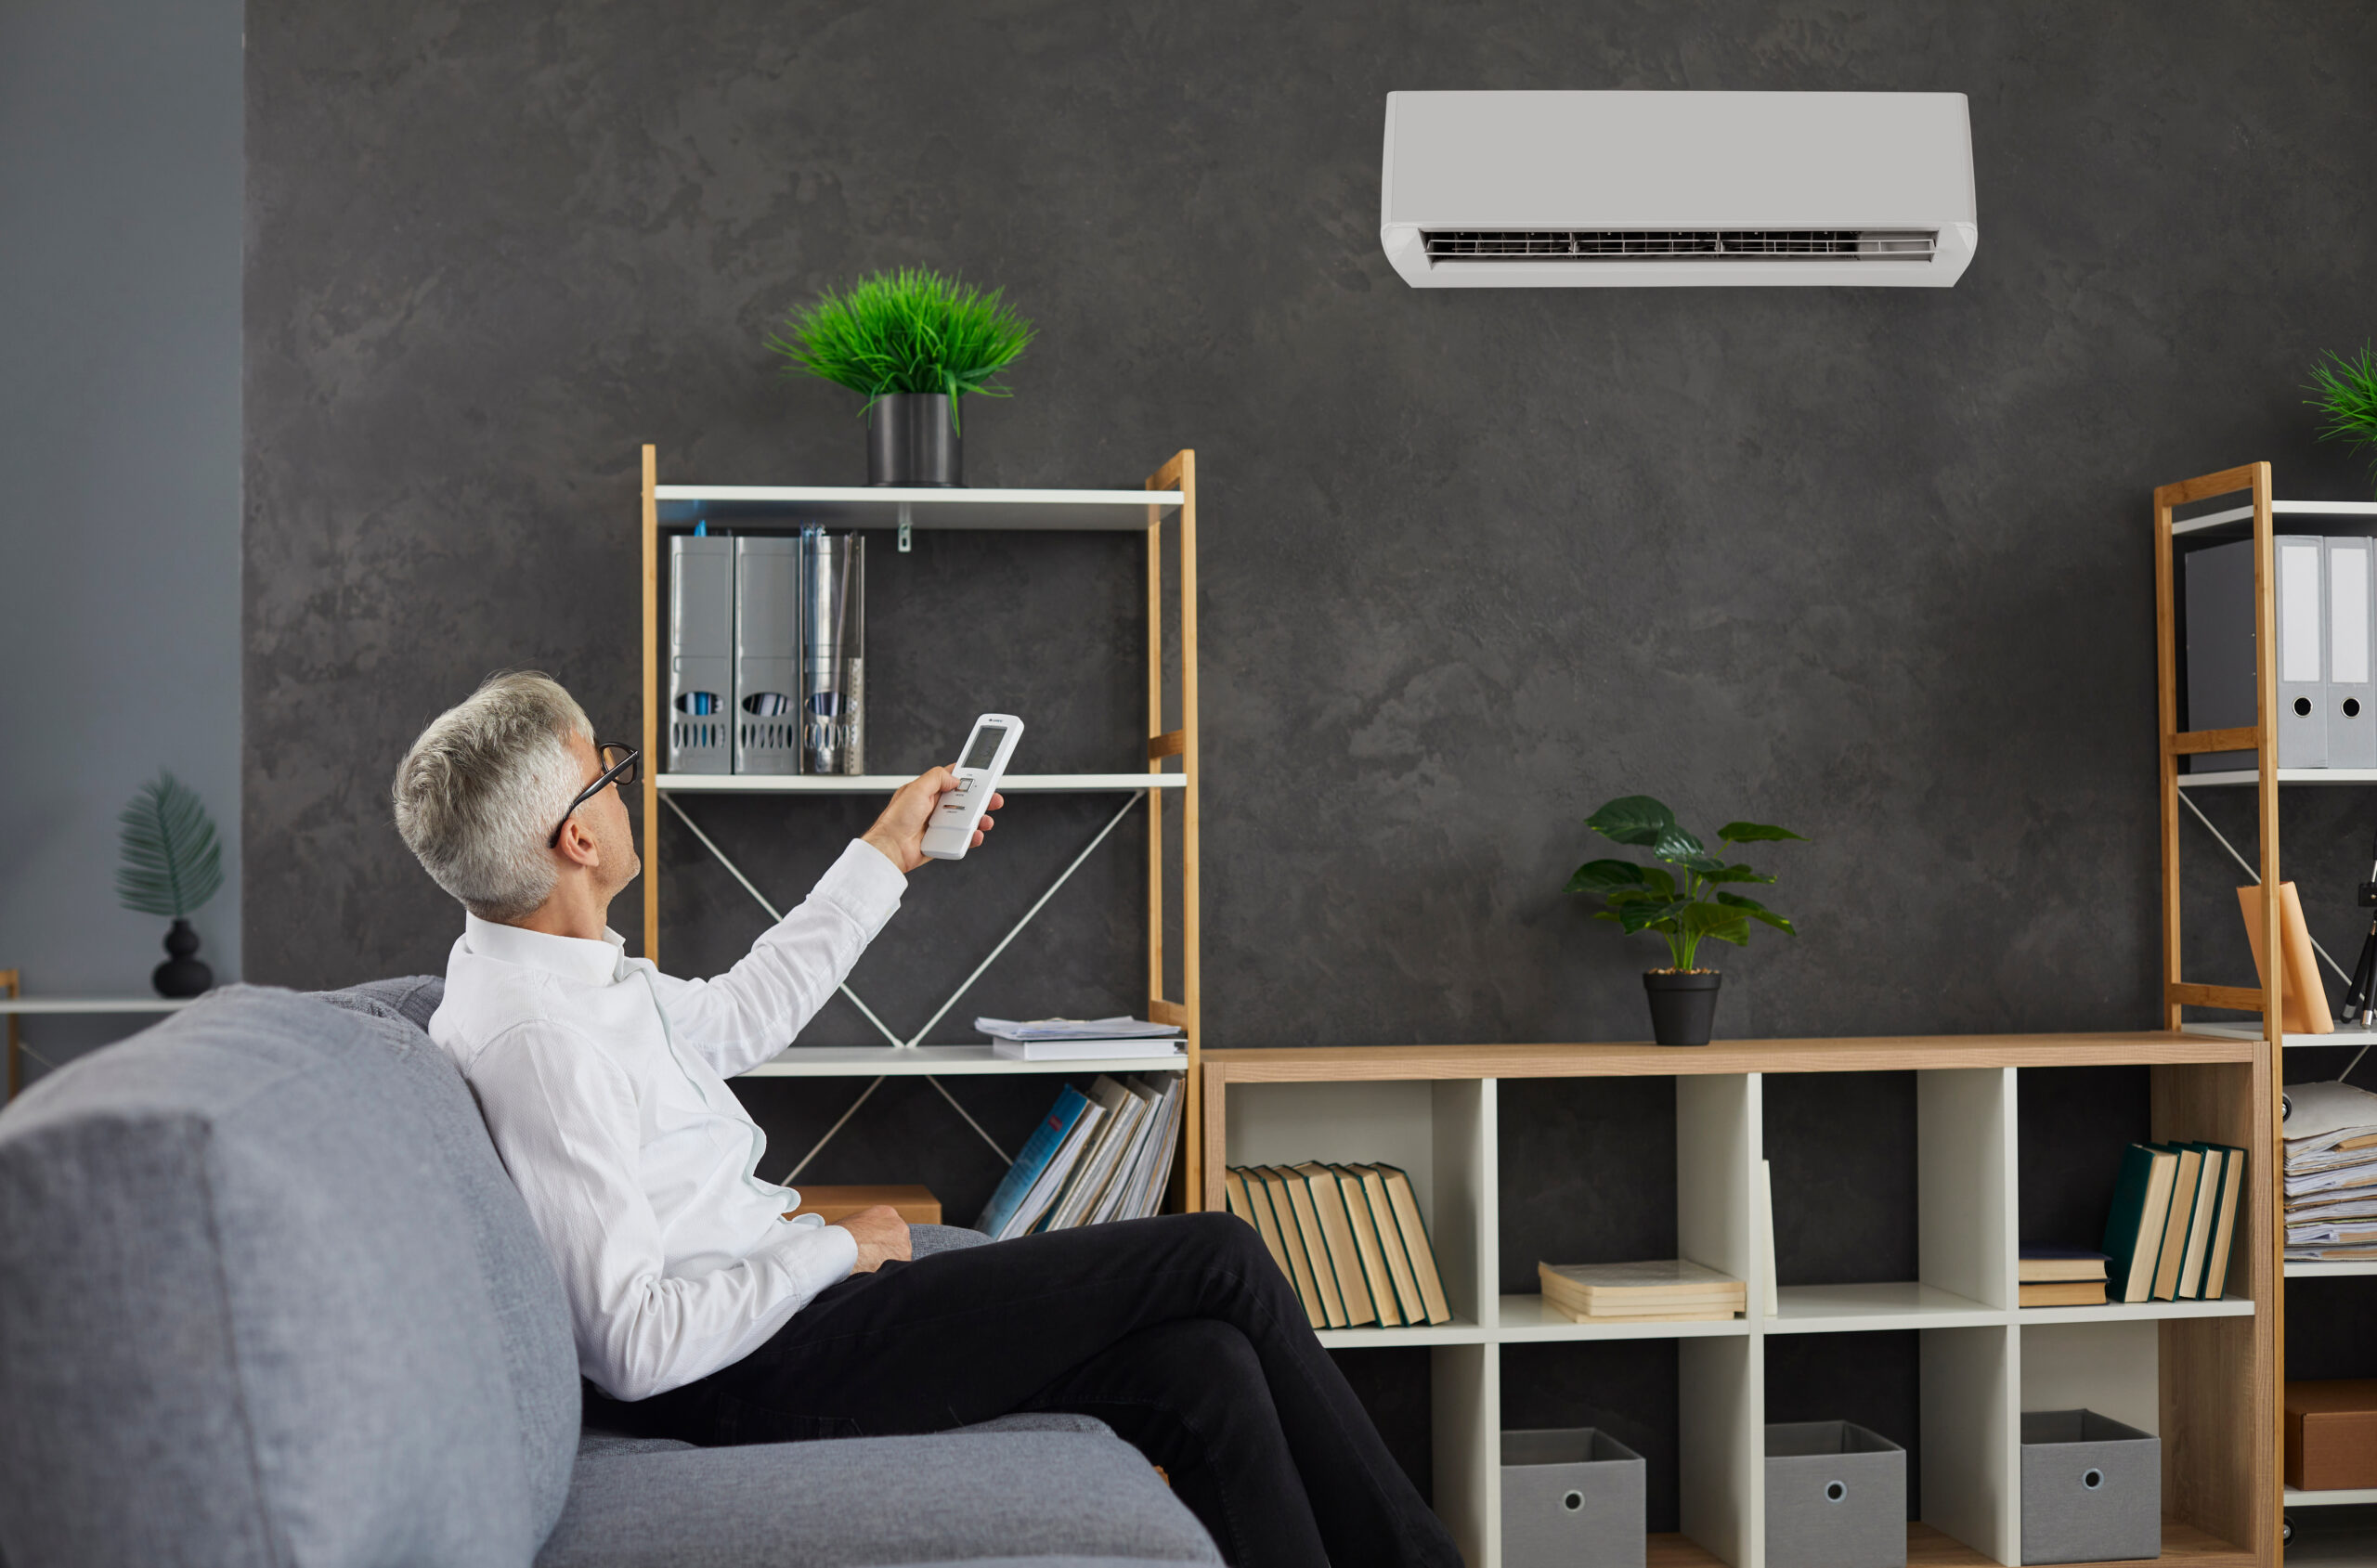 Older man sitting on a couch uses remote control to turn on ductless mini split HVAC